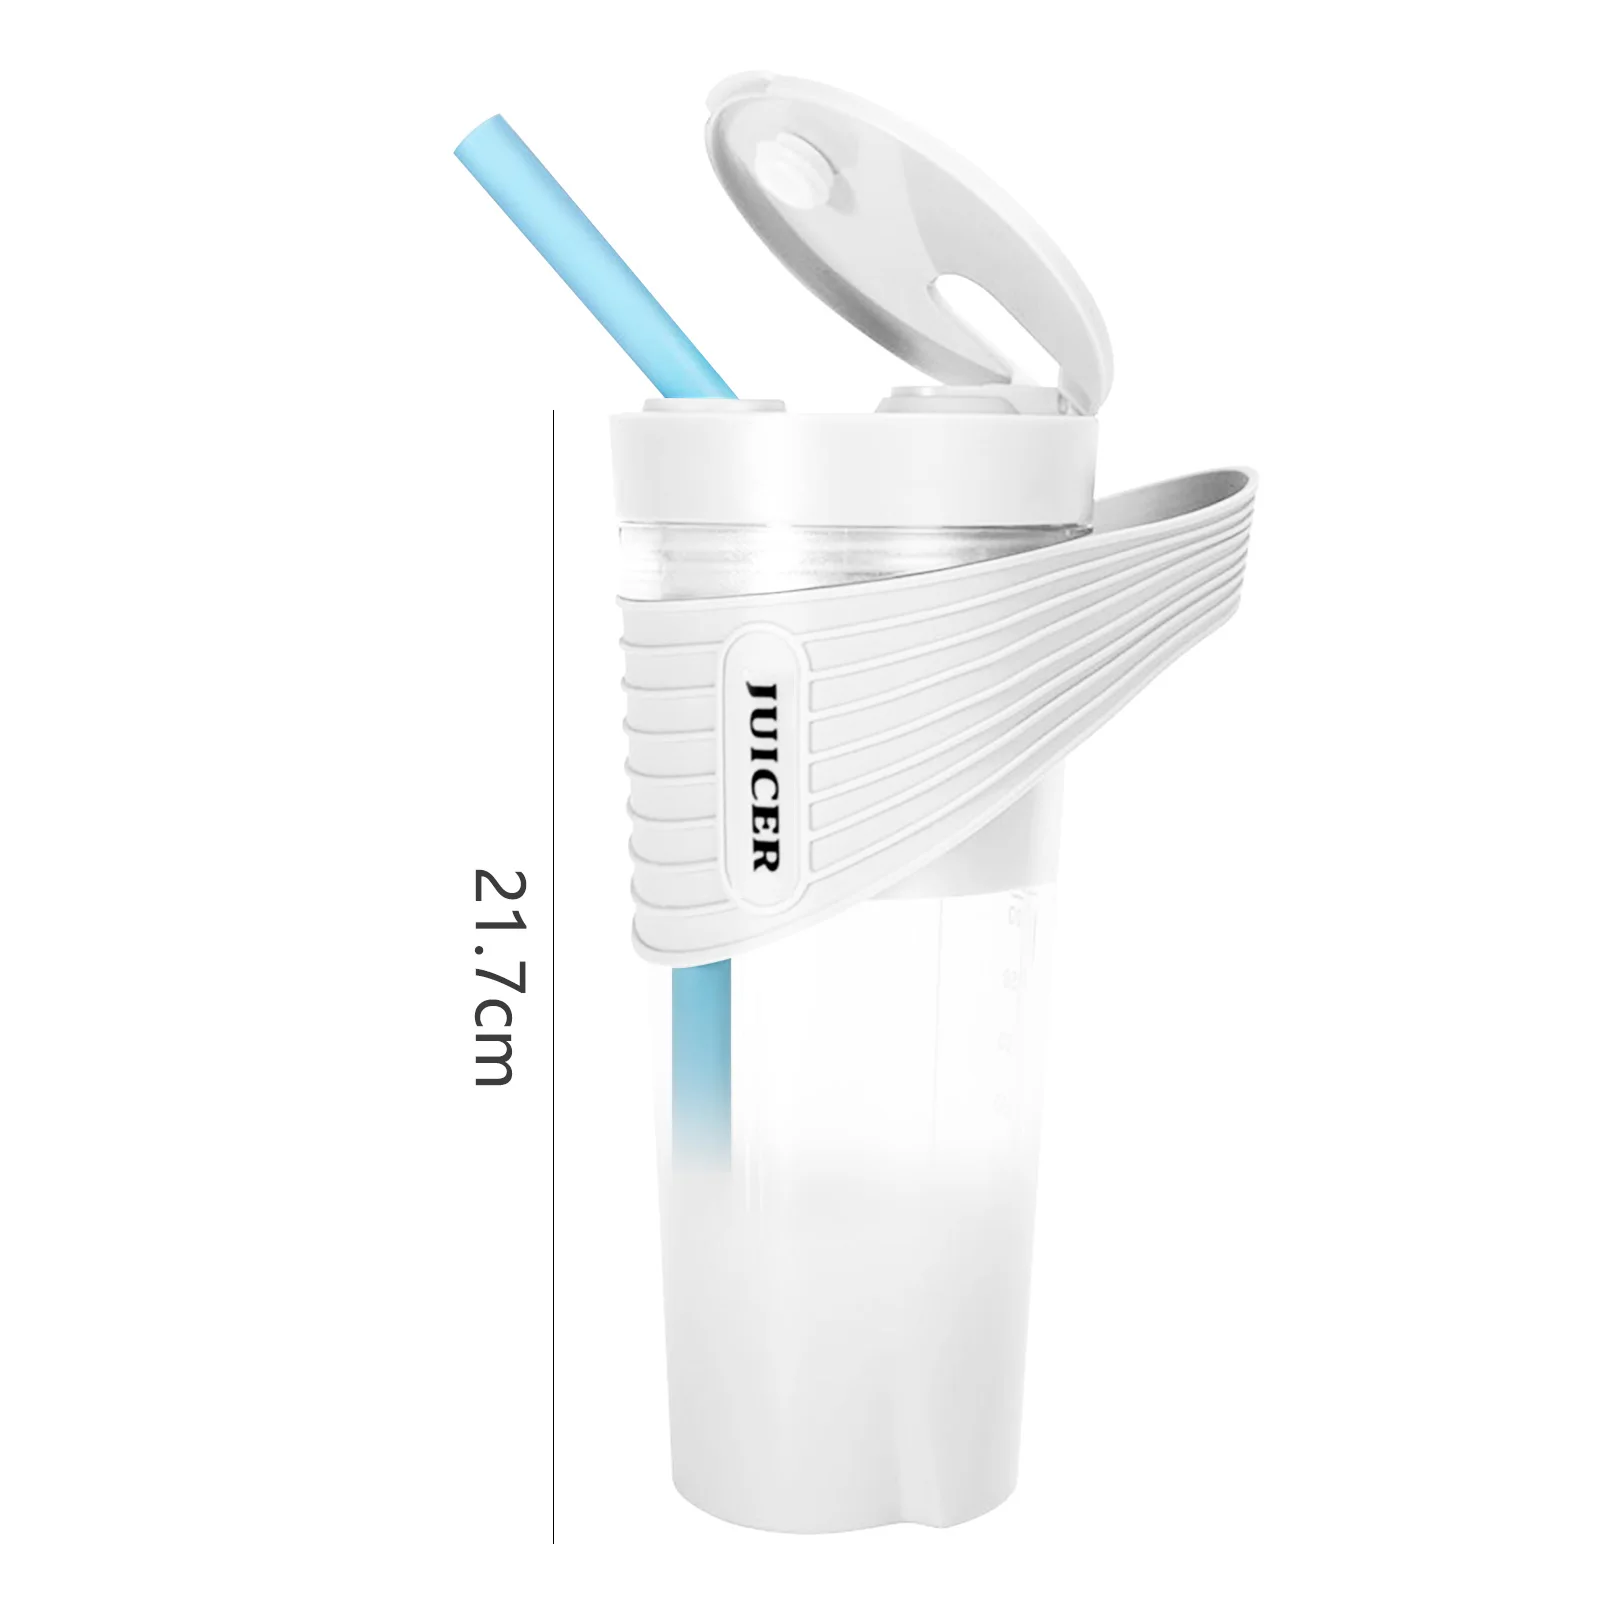 https://ae01.alicdn.com/kf/Safe752422021426485e9b82b1a702cb90/1000ml-Travel-Electric-Protein-Powder-Mixing-Cup-Automatic-Shaker-Sport-Water-Bottle-Drinking-Mixer-Shake-Cups.jpg